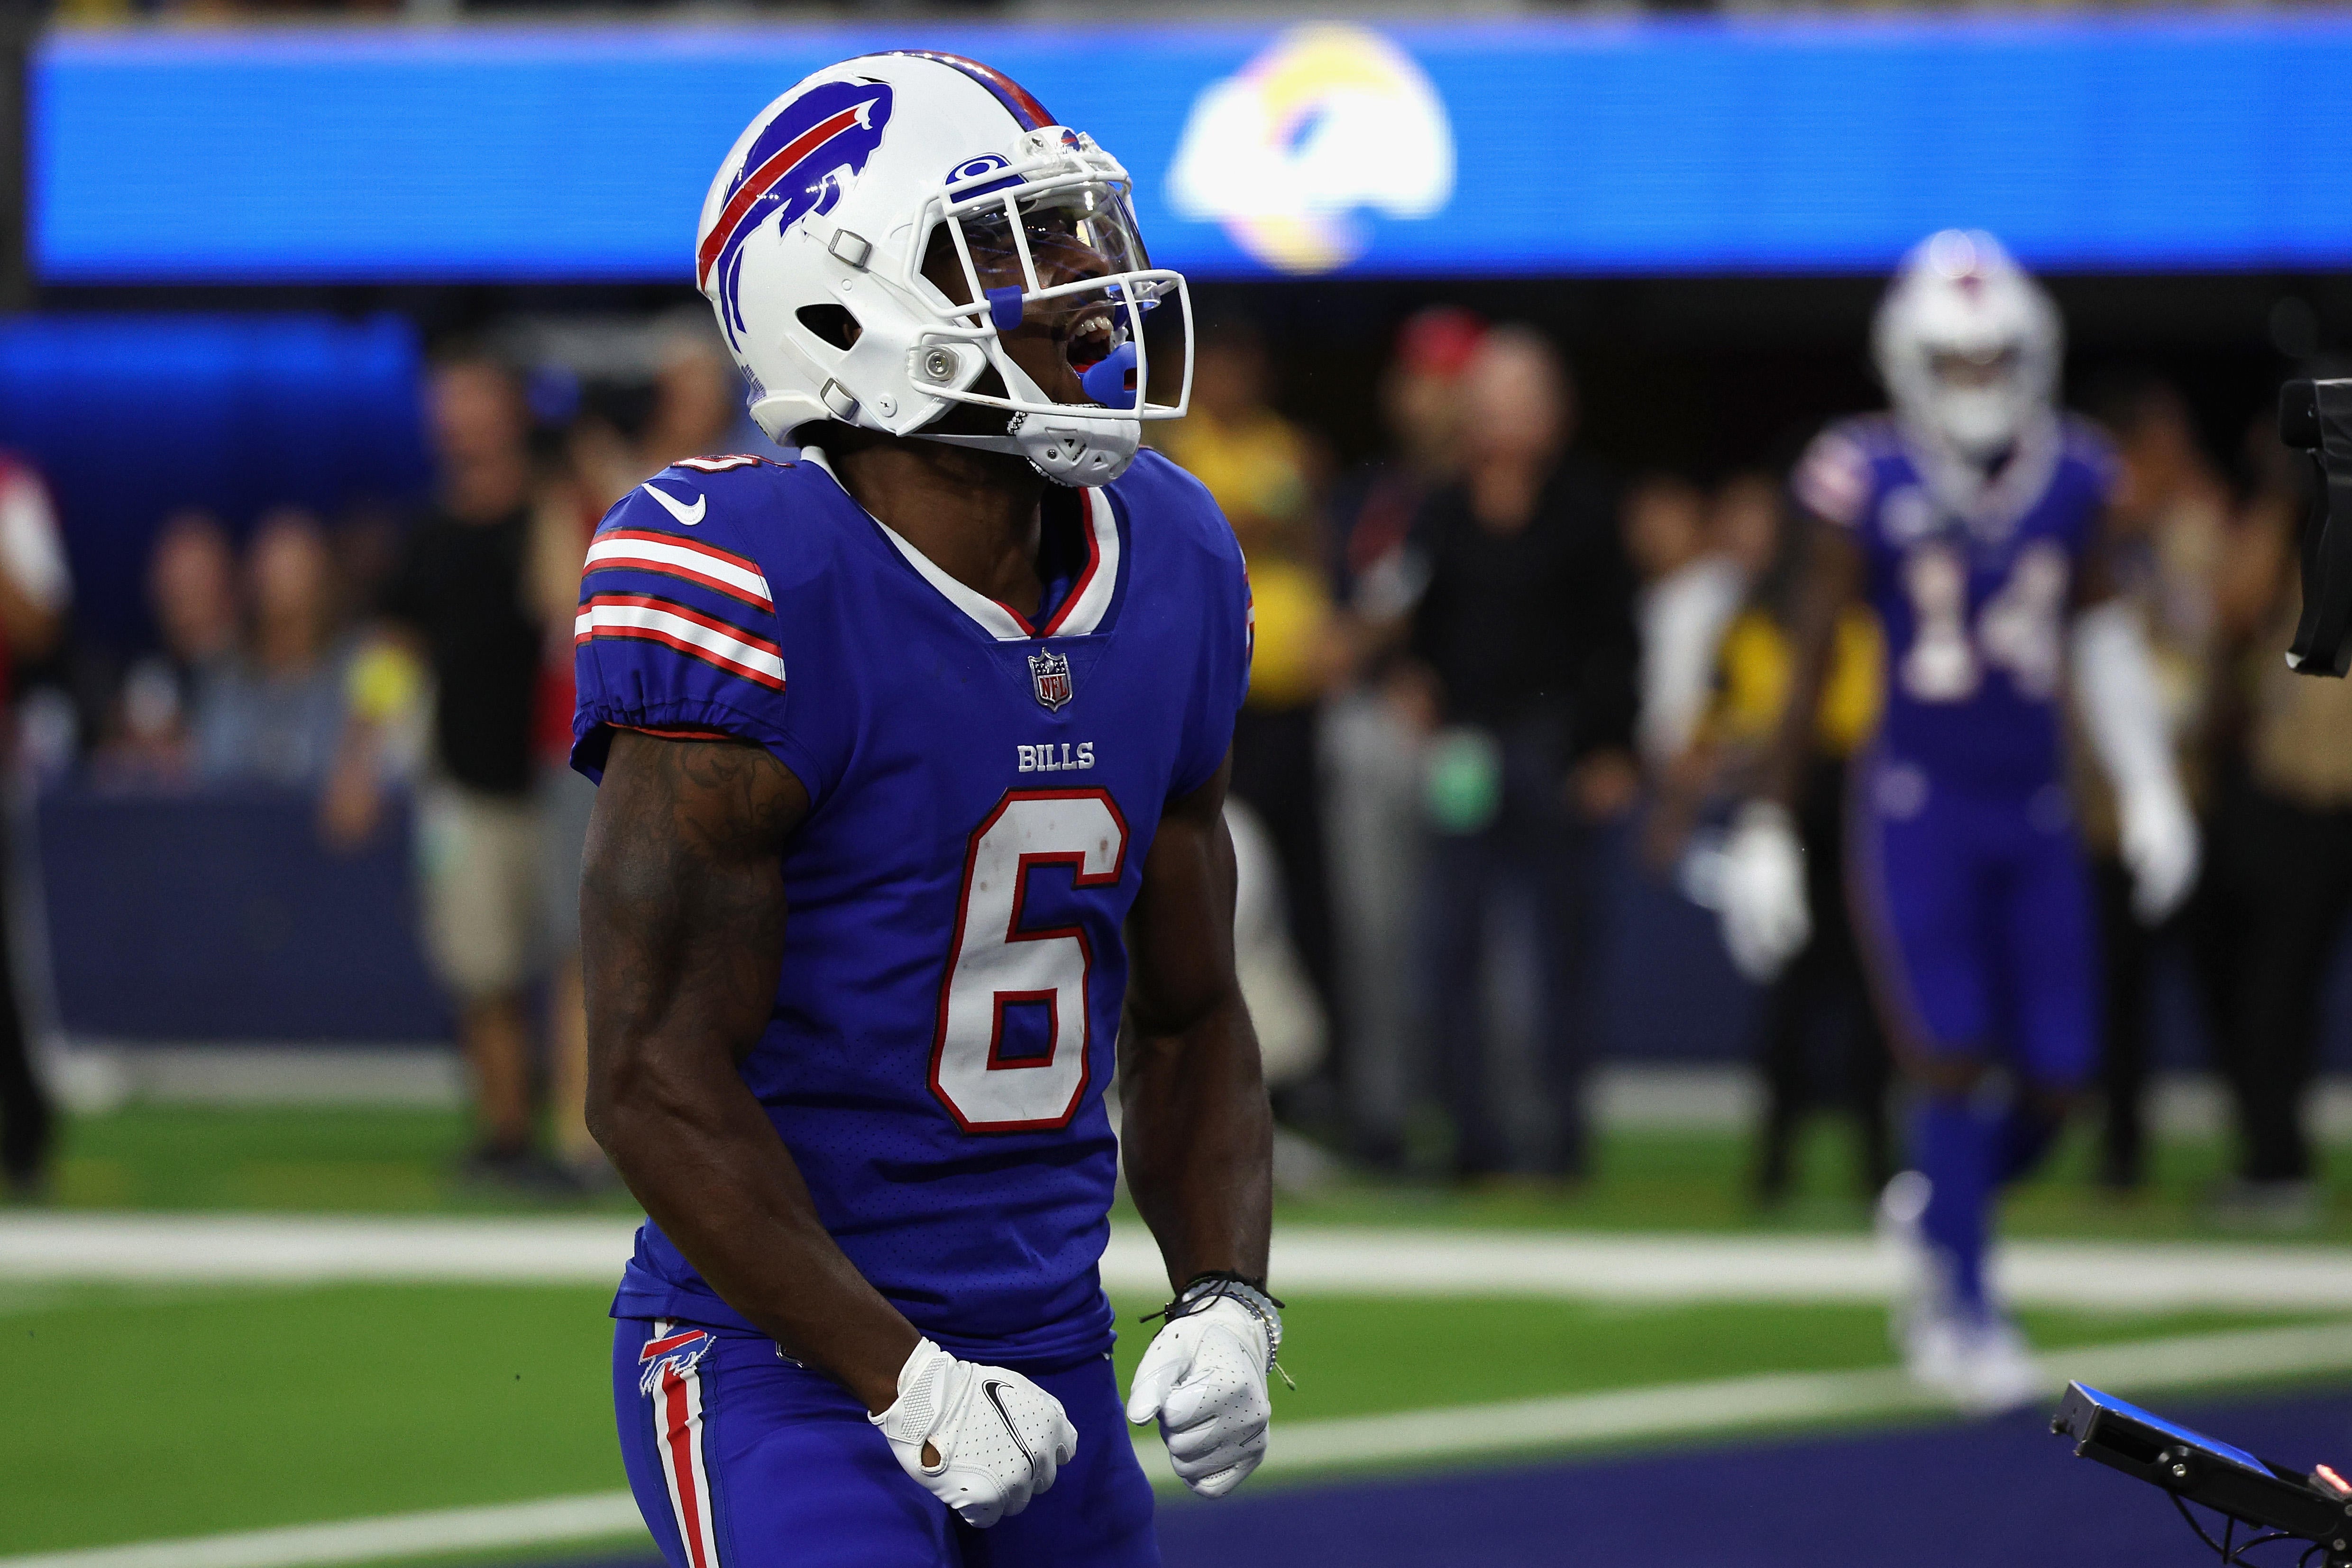 Bills receiver secretly pulled off a gender reveal after scoring a TD during Buffalo's blowout win over Rams